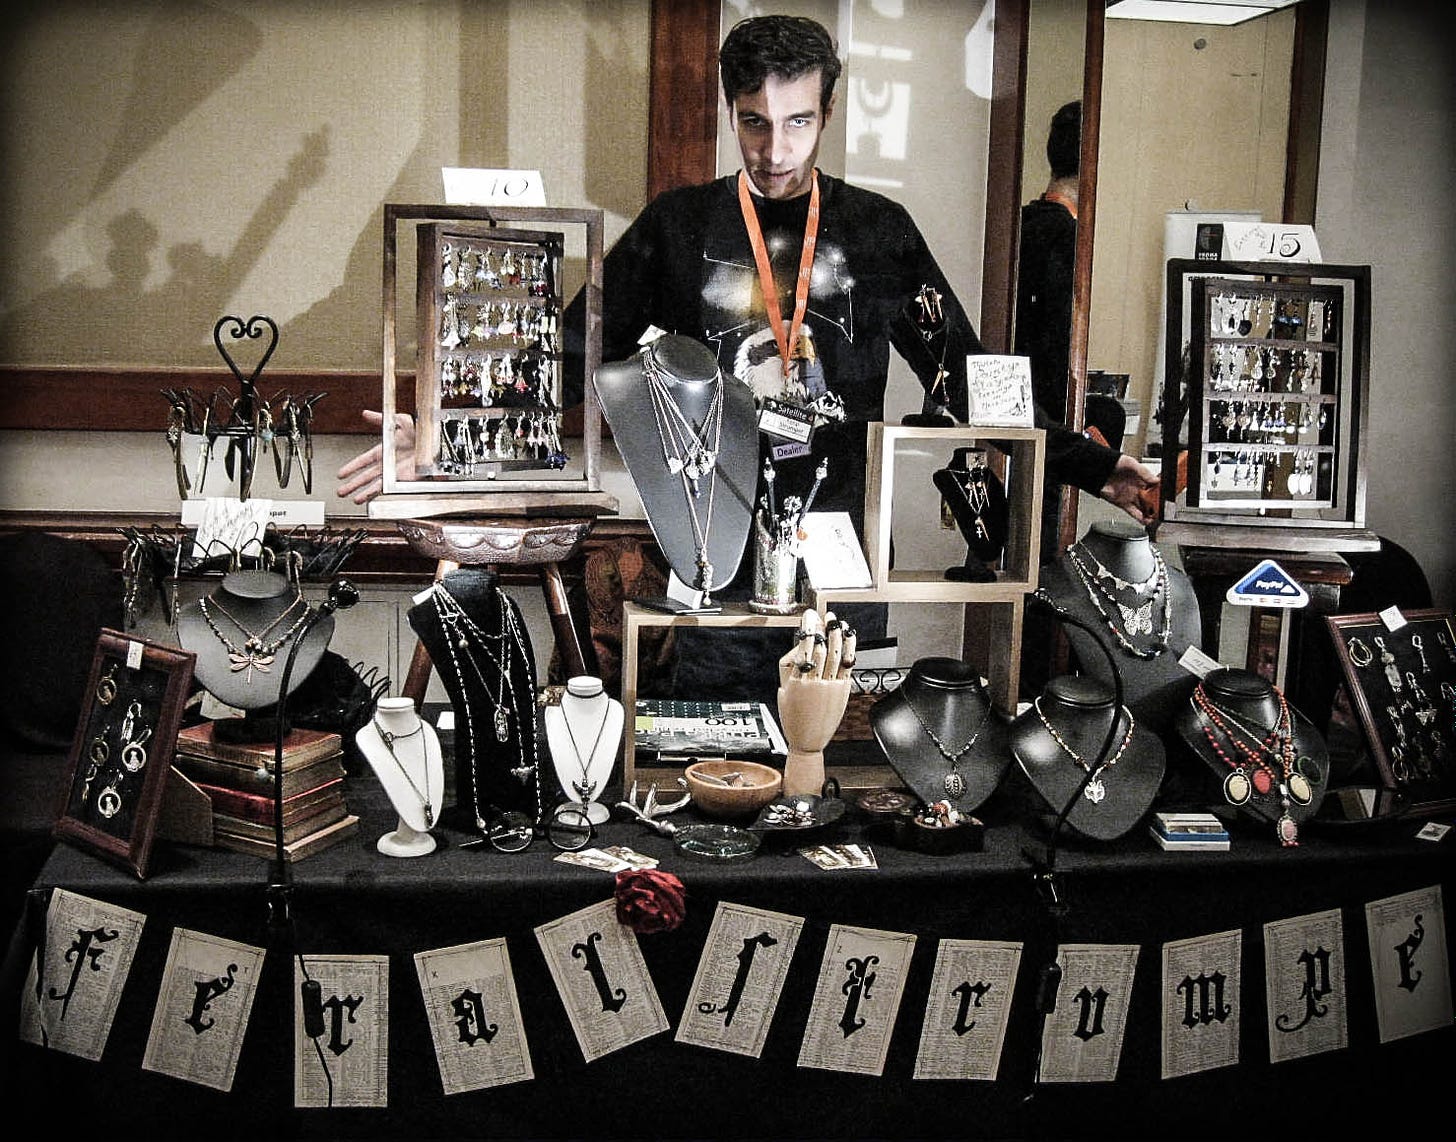 A dark haired man poses dramatically in front of a table full of Victorian jewellery displays. The lighting is dramatic, with lots of shadows